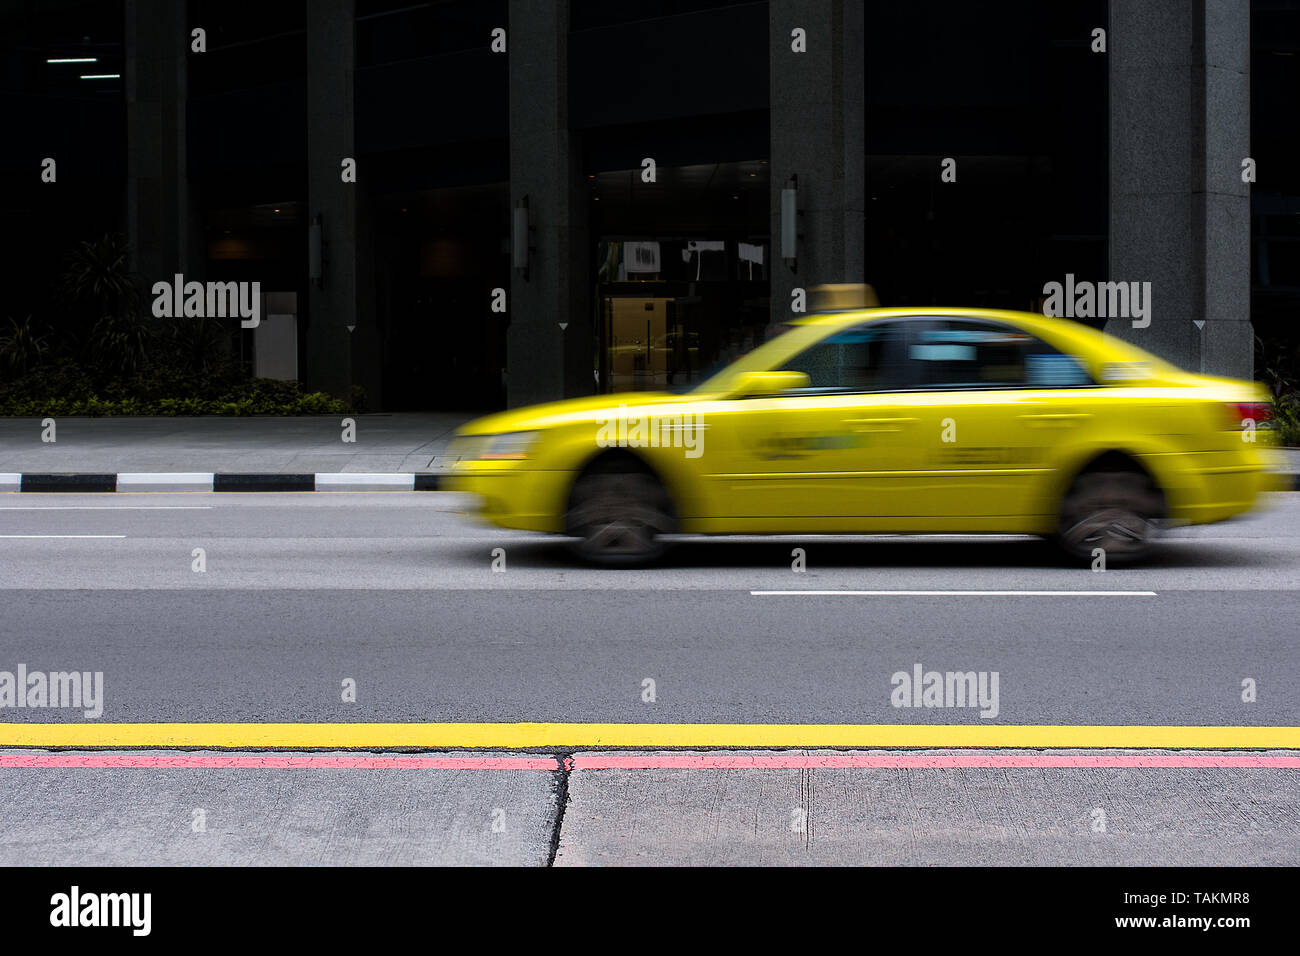 Yellow taxi of Singapore drives past in a motion blur on empty city road. Stock Photo